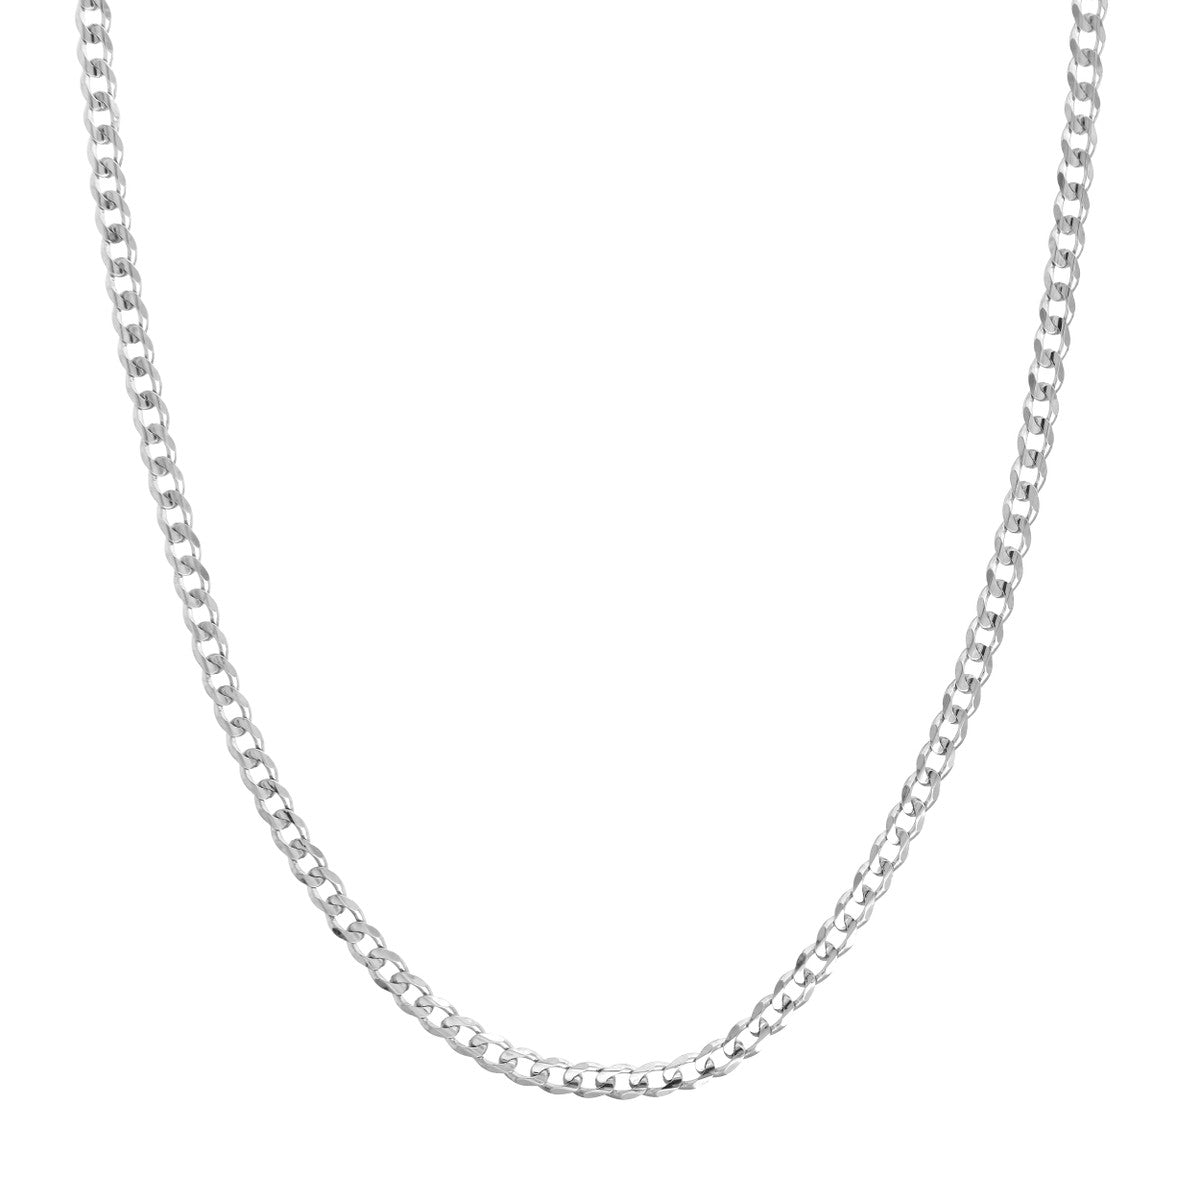 Mini Curb Chain in Sterling Silver - 4mm